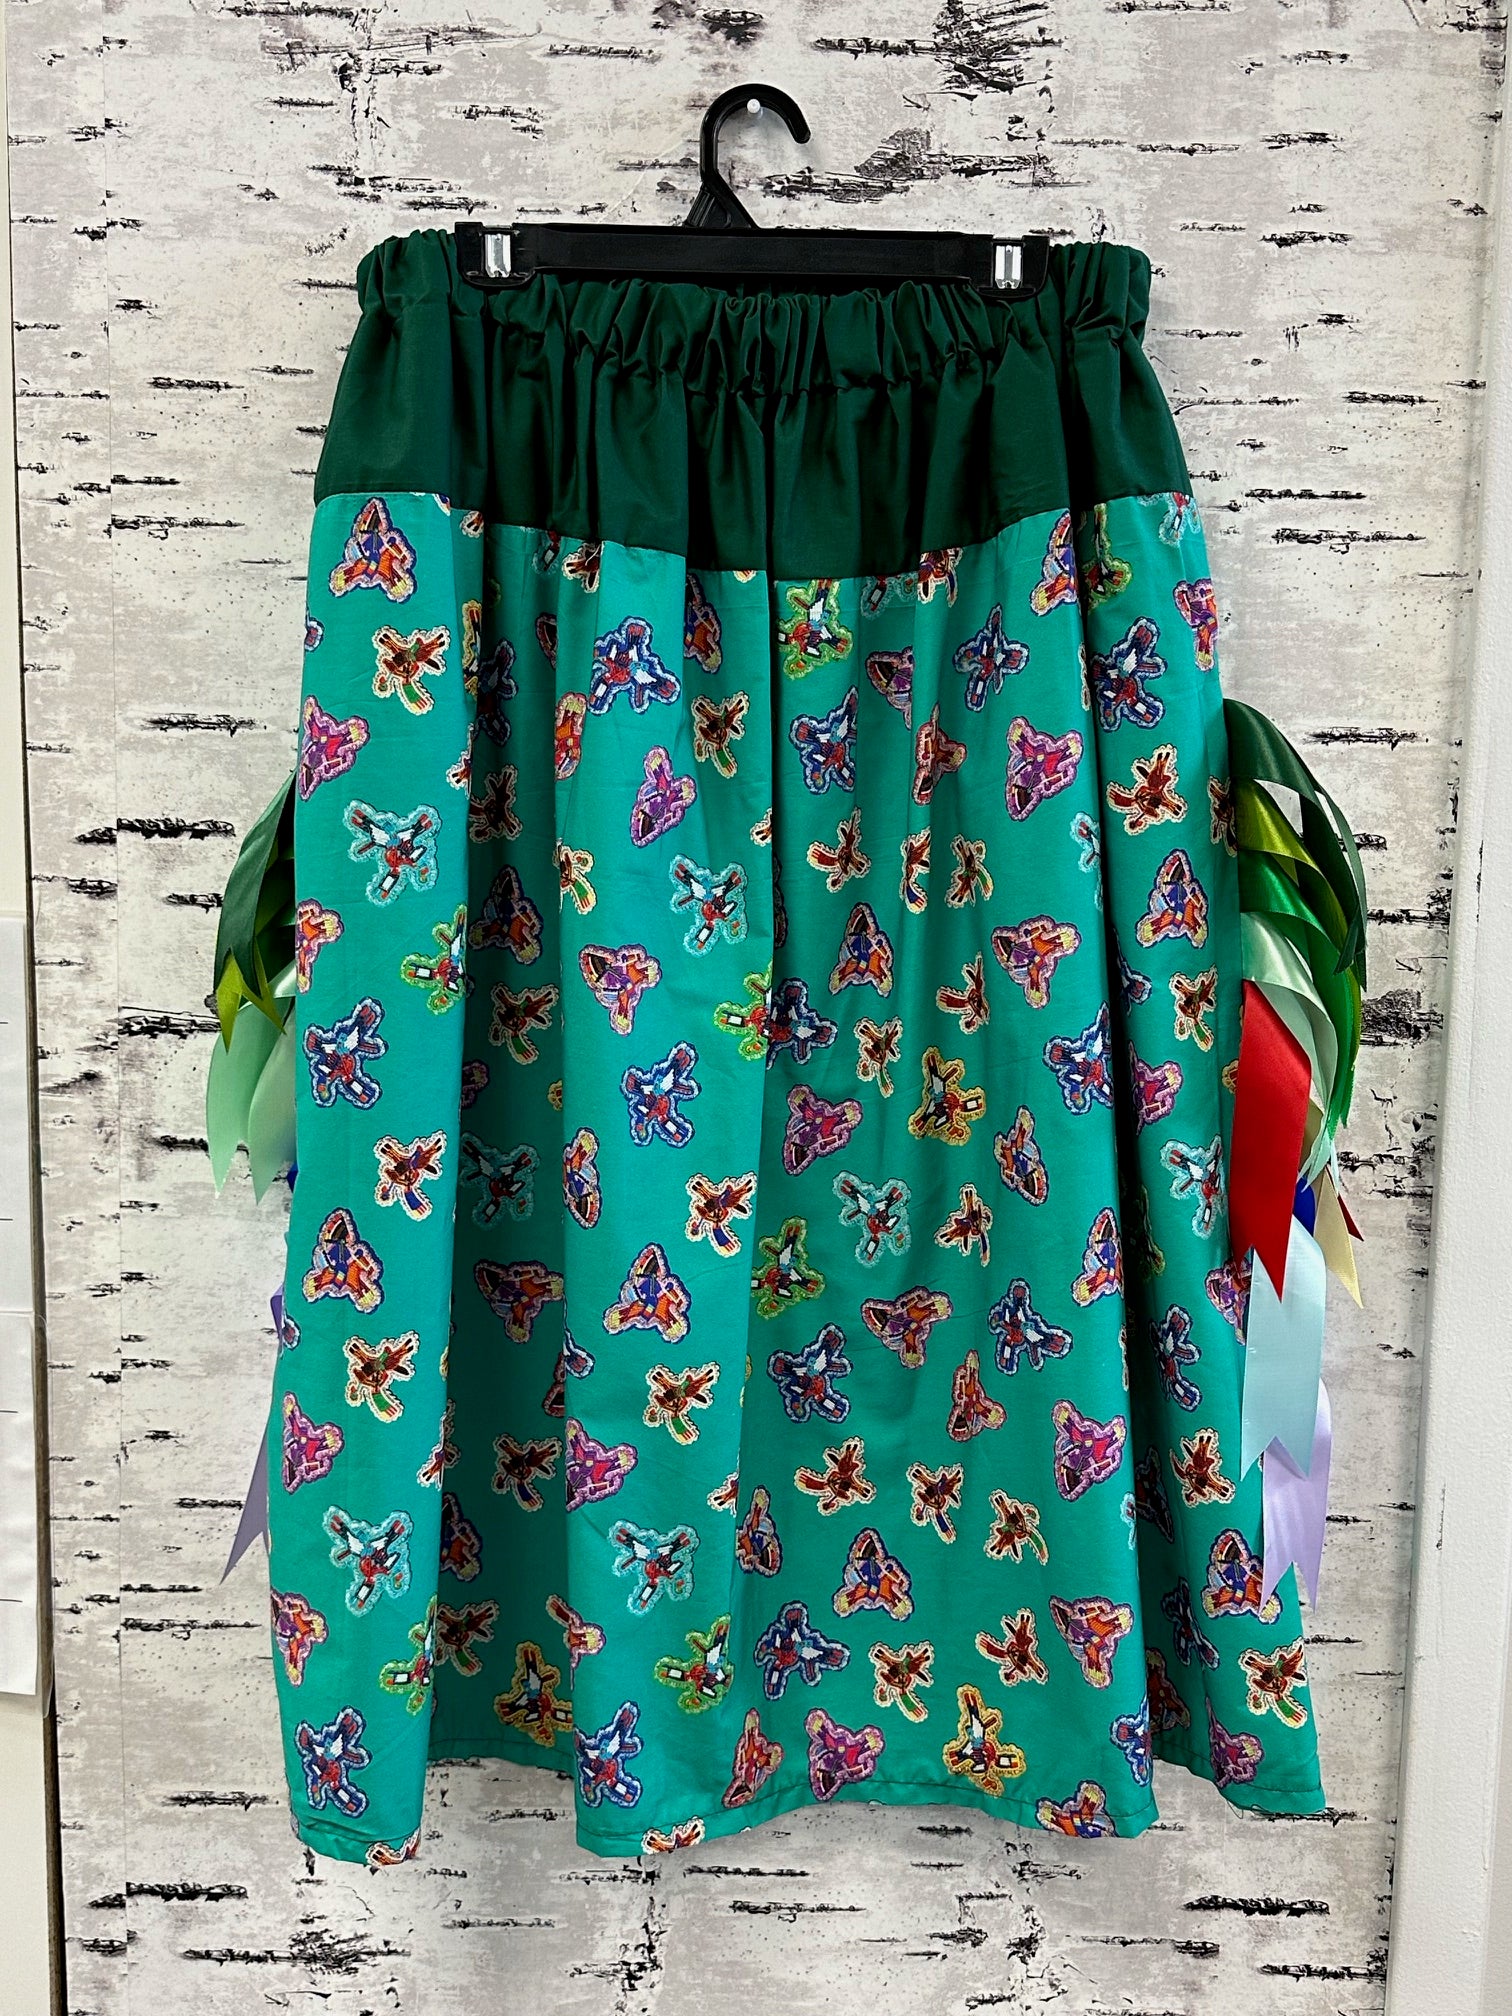 Pine and Turquoise Beaded Rider Ribbon skirt